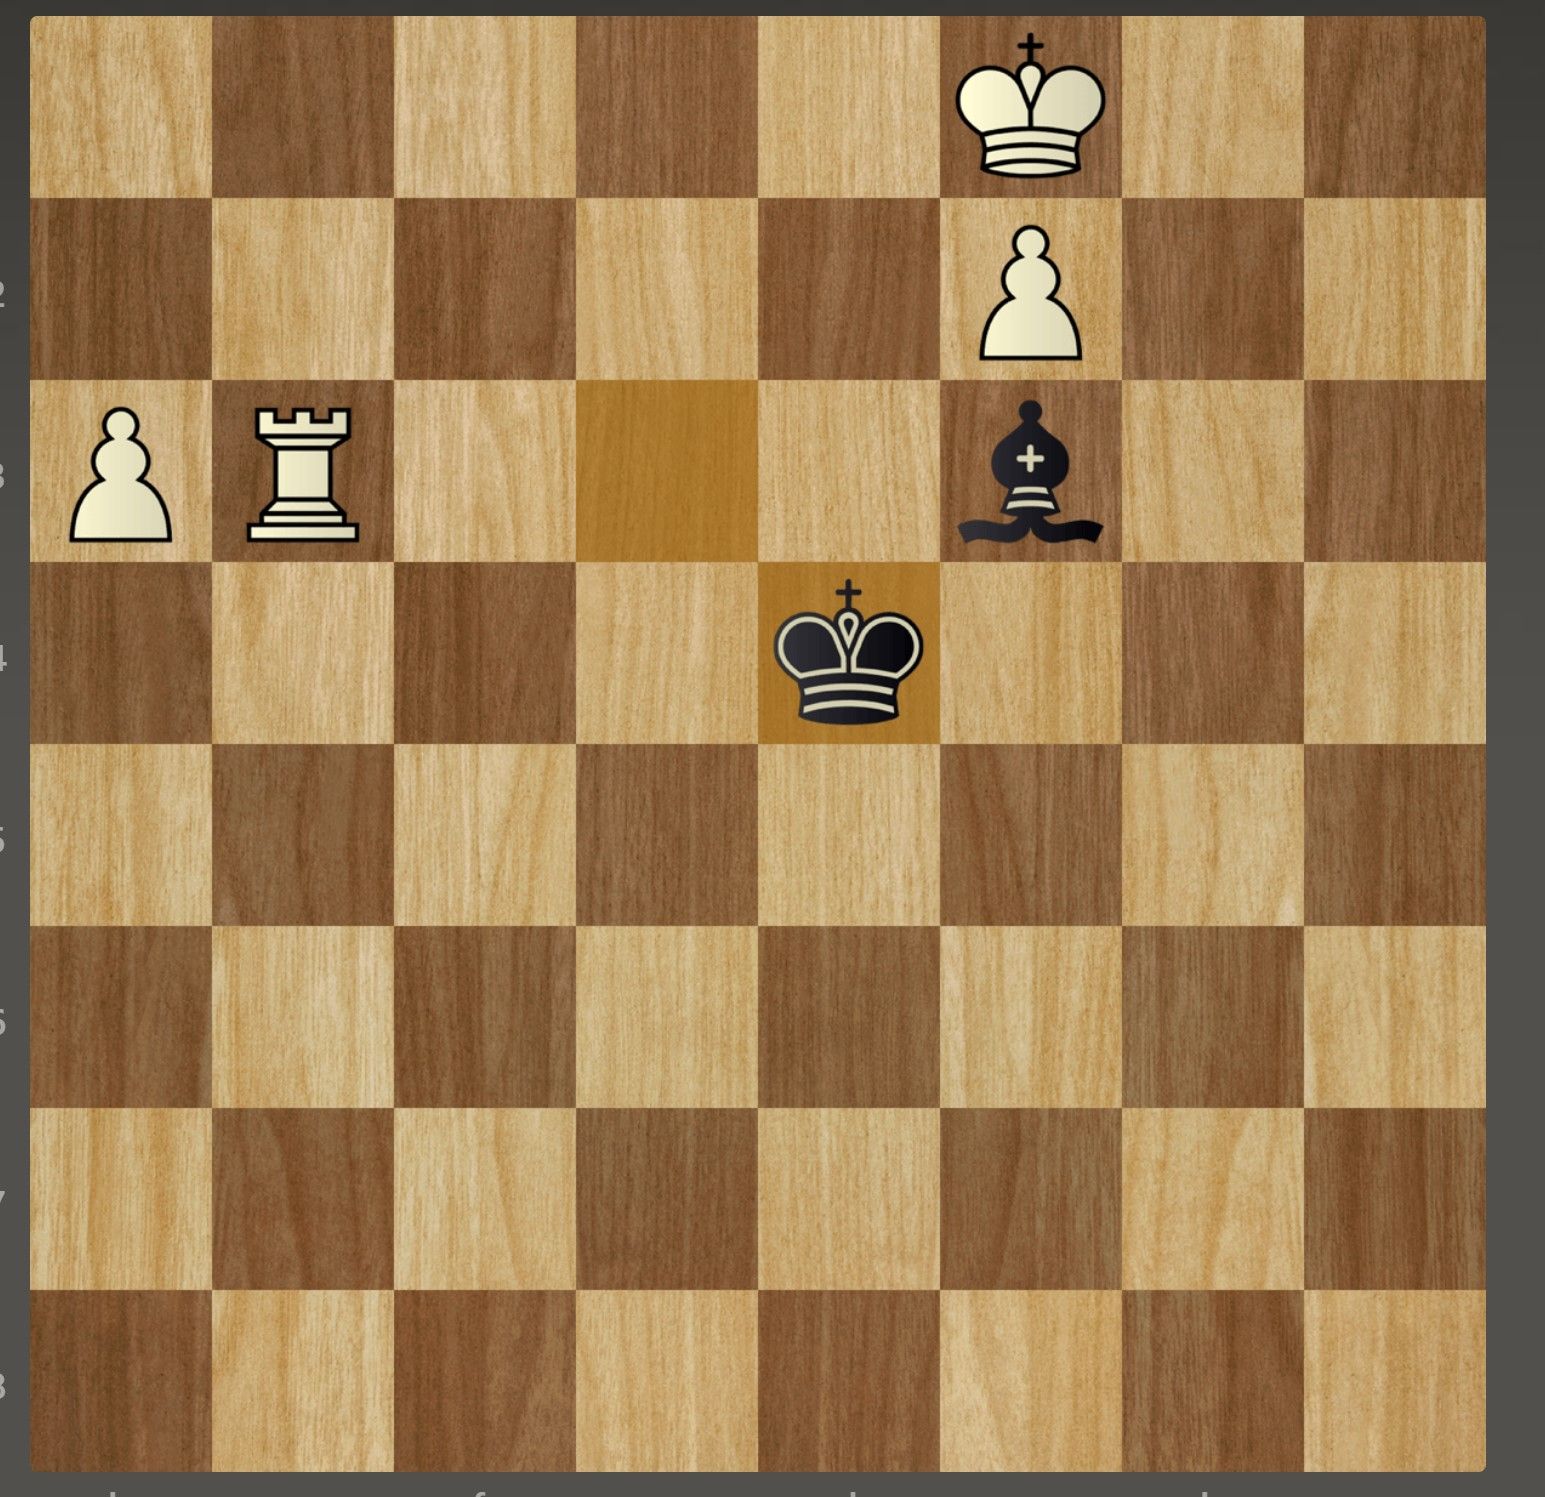 DRAW - Why?? - Chess Forums 